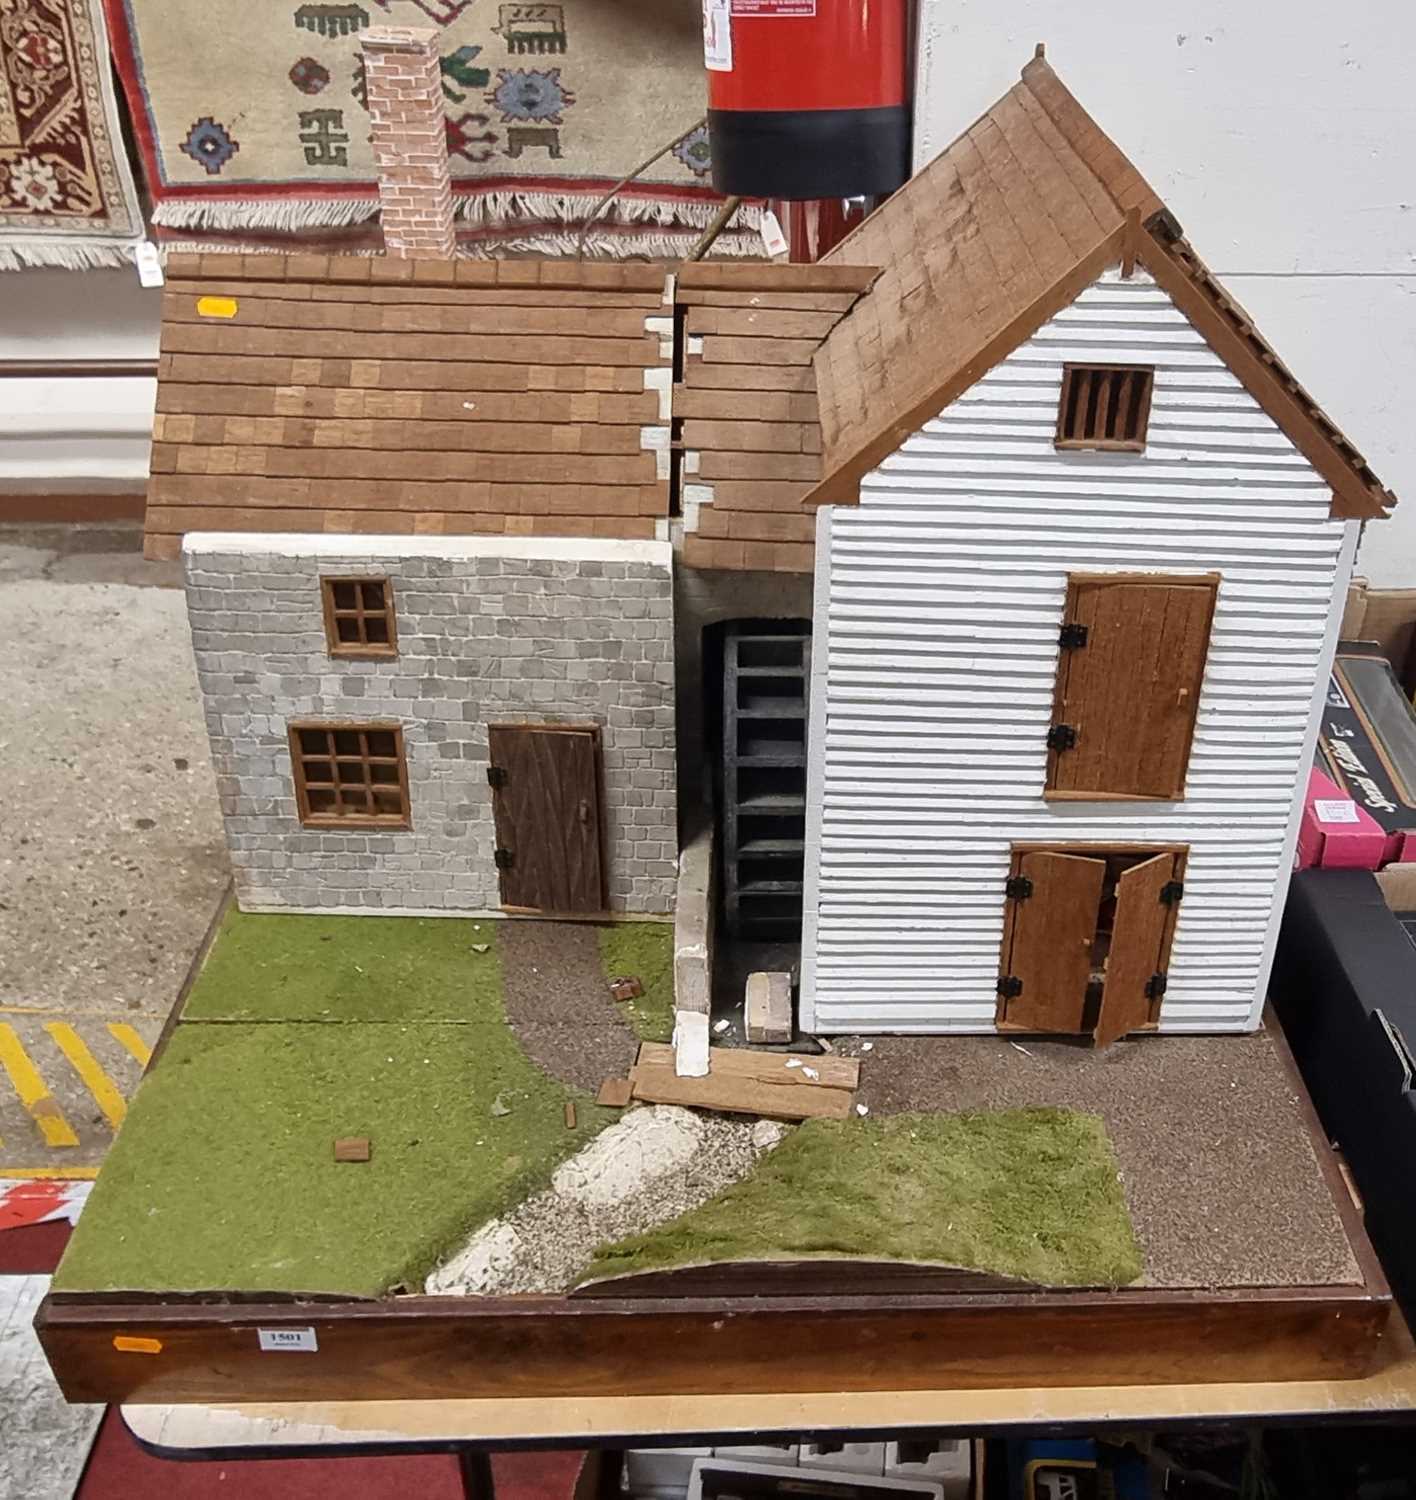 A scratch built dolls house model of a mill with furniture and accessories included